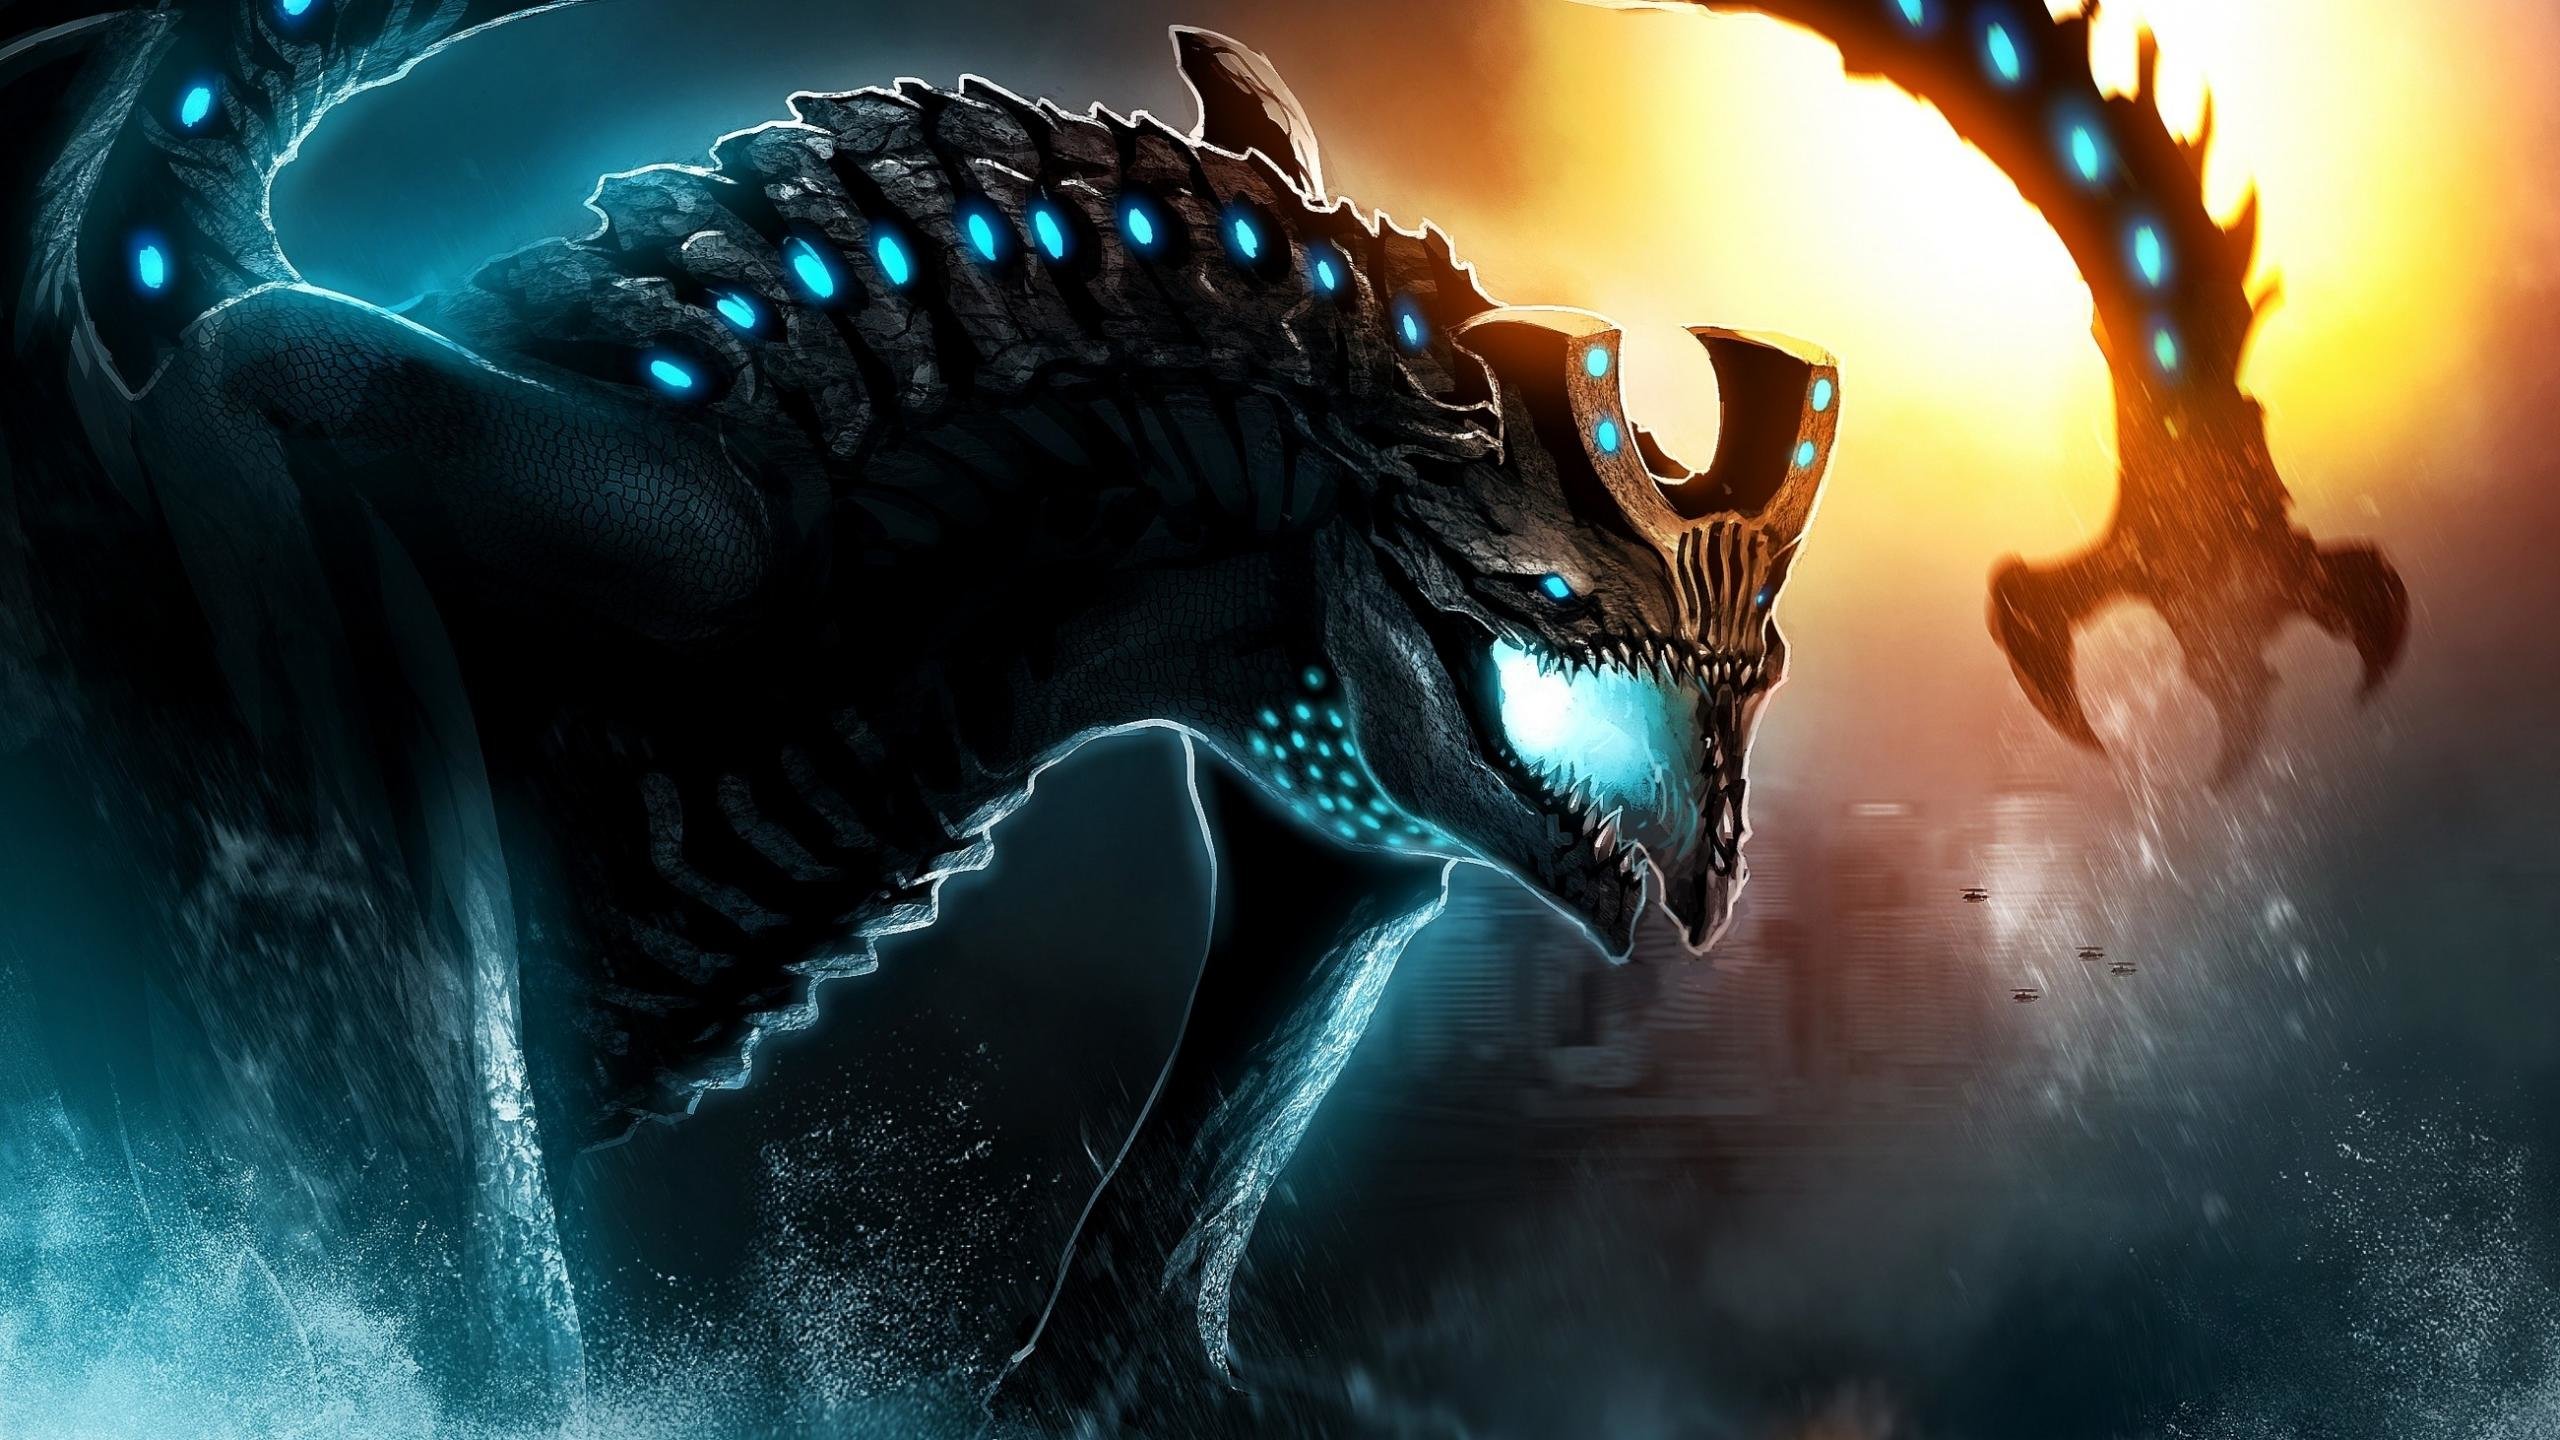 Pacific Rim wallpapers 2560x1440